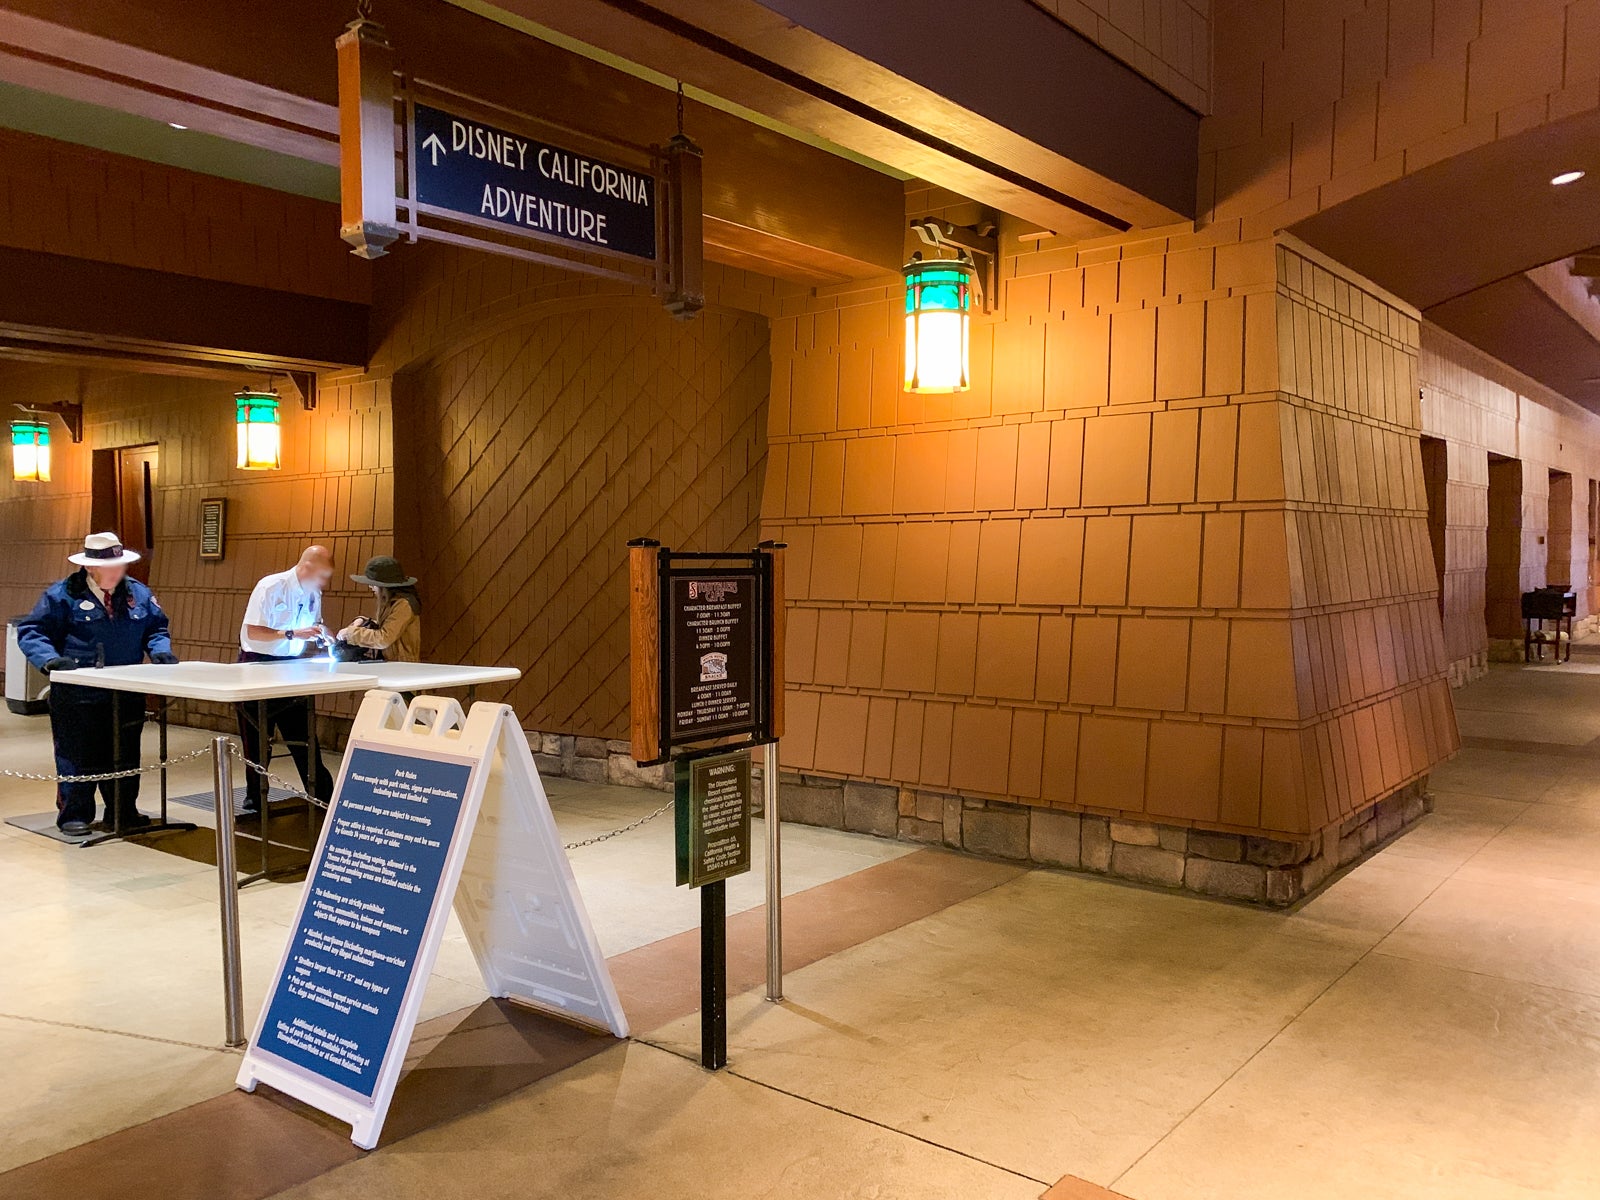 security guards check a bag at a table in a hallway, with a sign above pointing to Disney California Adventure